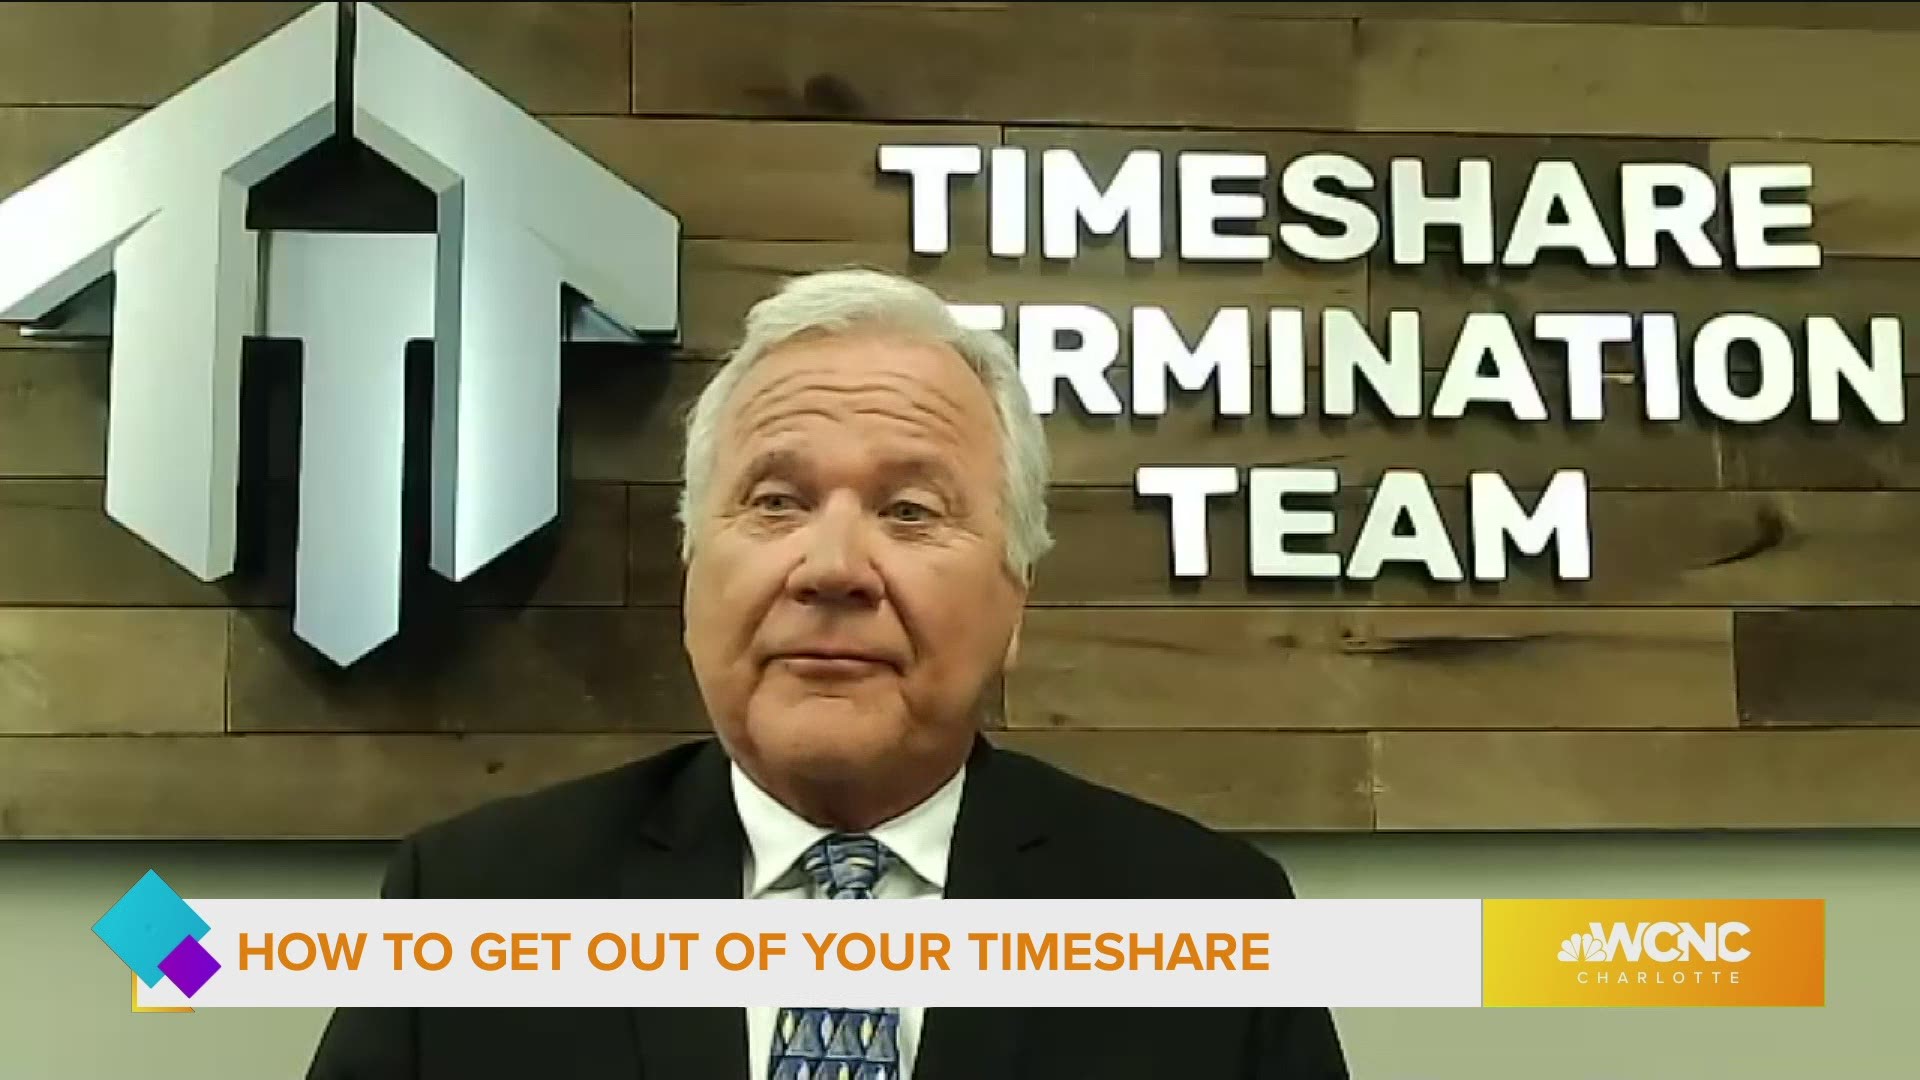 Timeshare Termination Team can help get you out of your costly contract